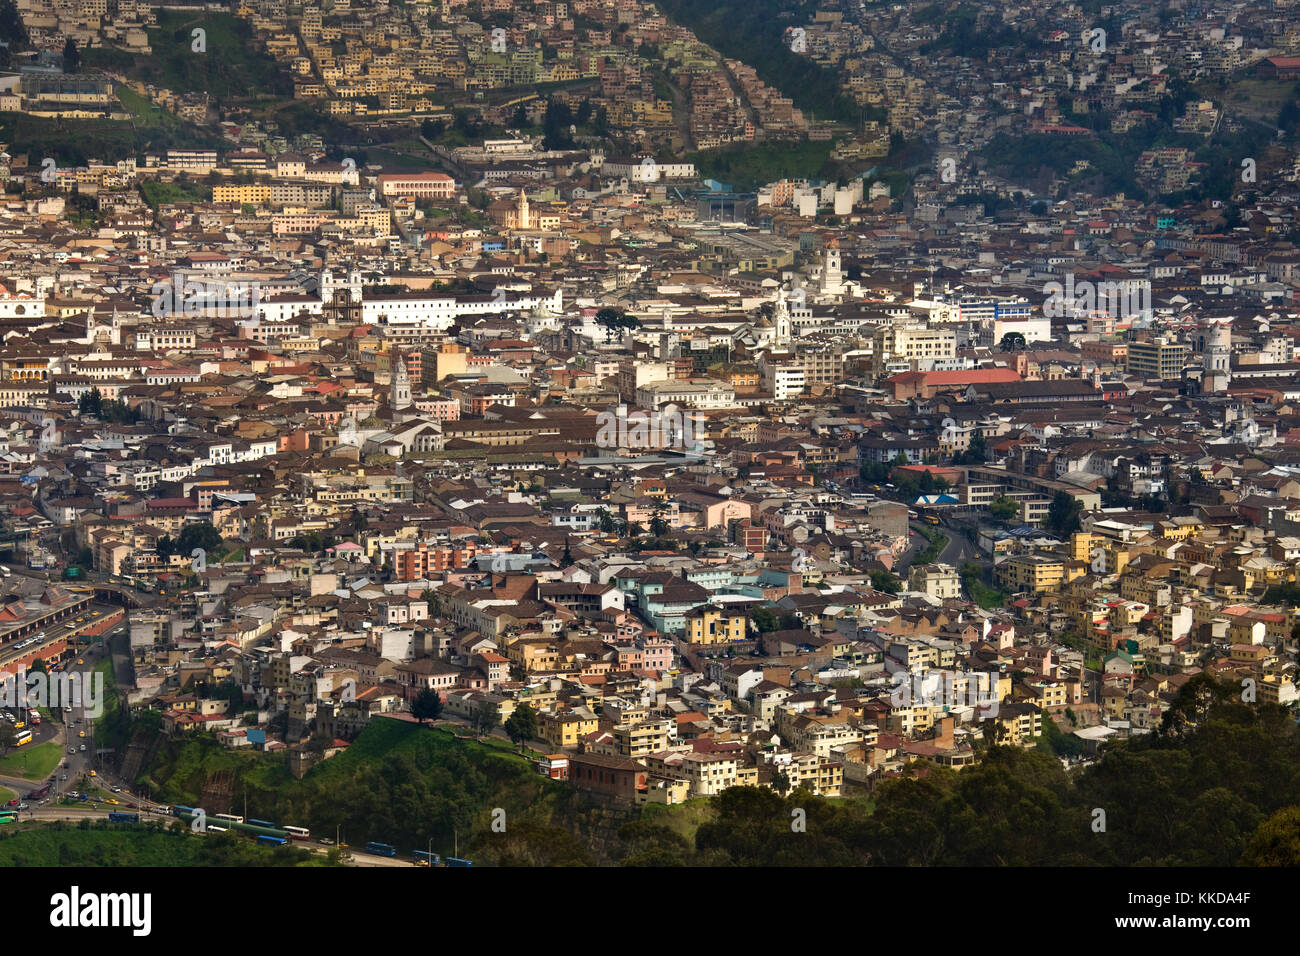 The colonial centre of the city of Quito in Ecuador, South America. Stock Photo